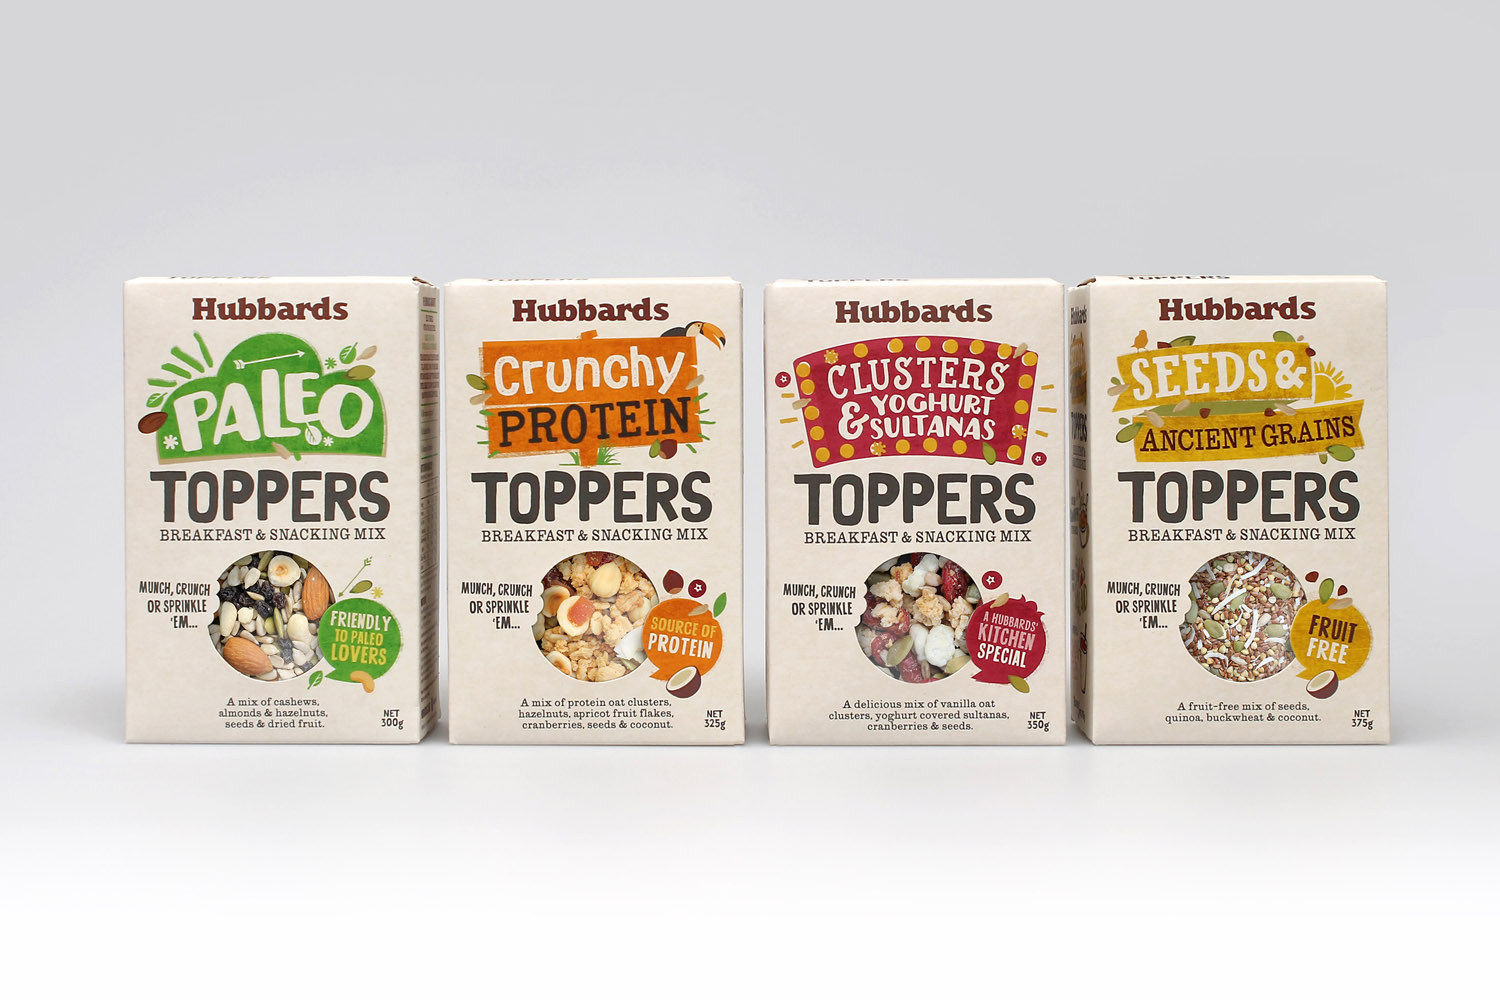 New packaging for Hubbards Toppers by Coats Design, New Zealand